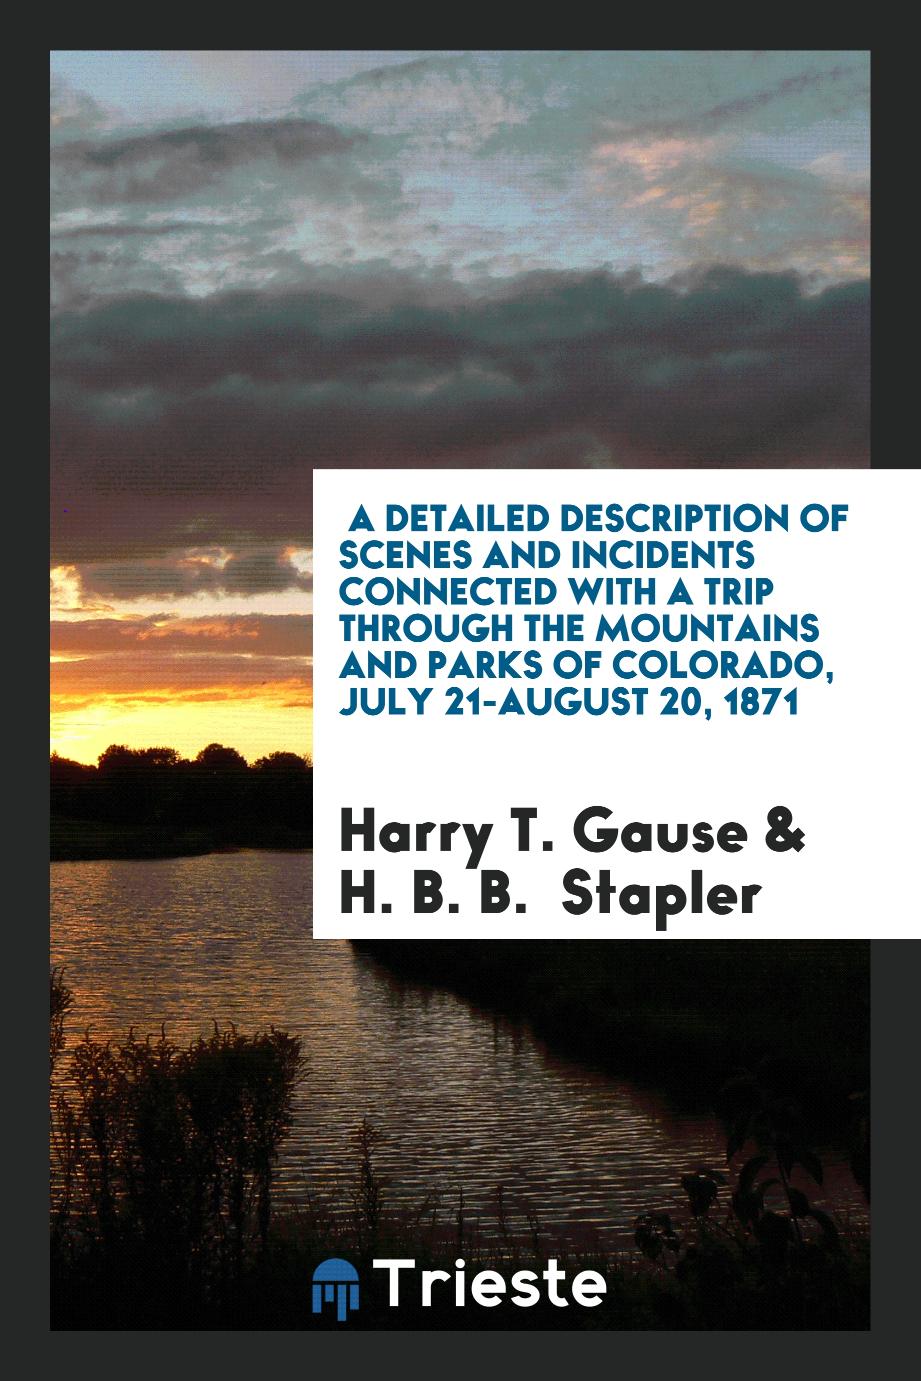 A Detailed Description of scenes and incidents connected with a trip through the mountains and parks of Colorado, July 21-August 20, 1871